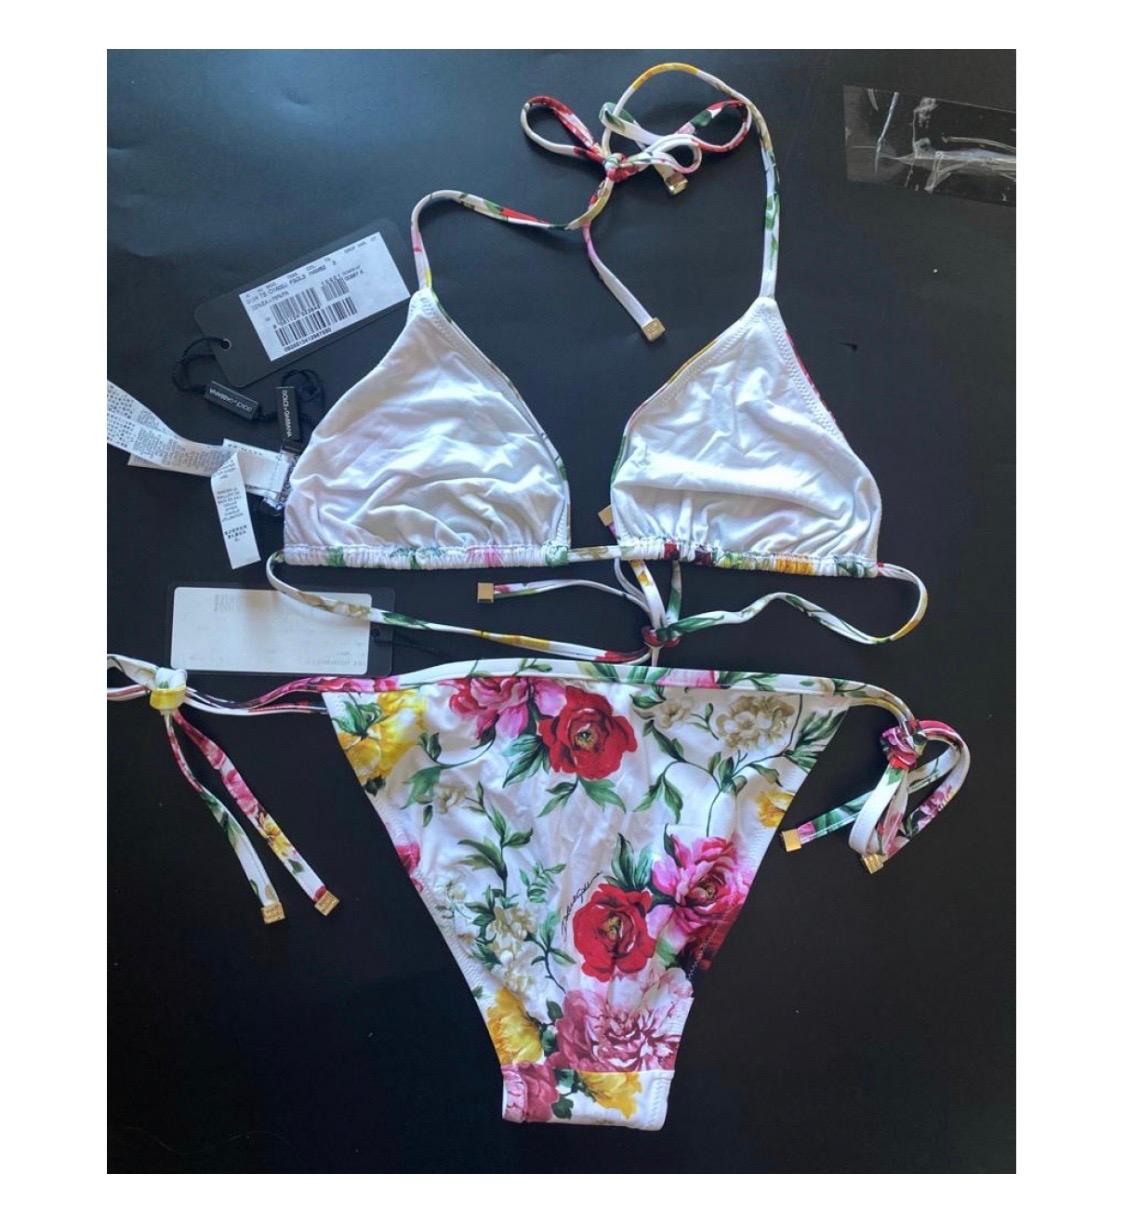 Dolce & Gabbana Peony printed
white multicolour bikini swimwear
Logo details adjustable straps.

Size 2IT corresponds 40IT UK12, S

Brand new with tags in the original DG
beachwear pouch.

Please check my other DG clothing,
shoes, bags &